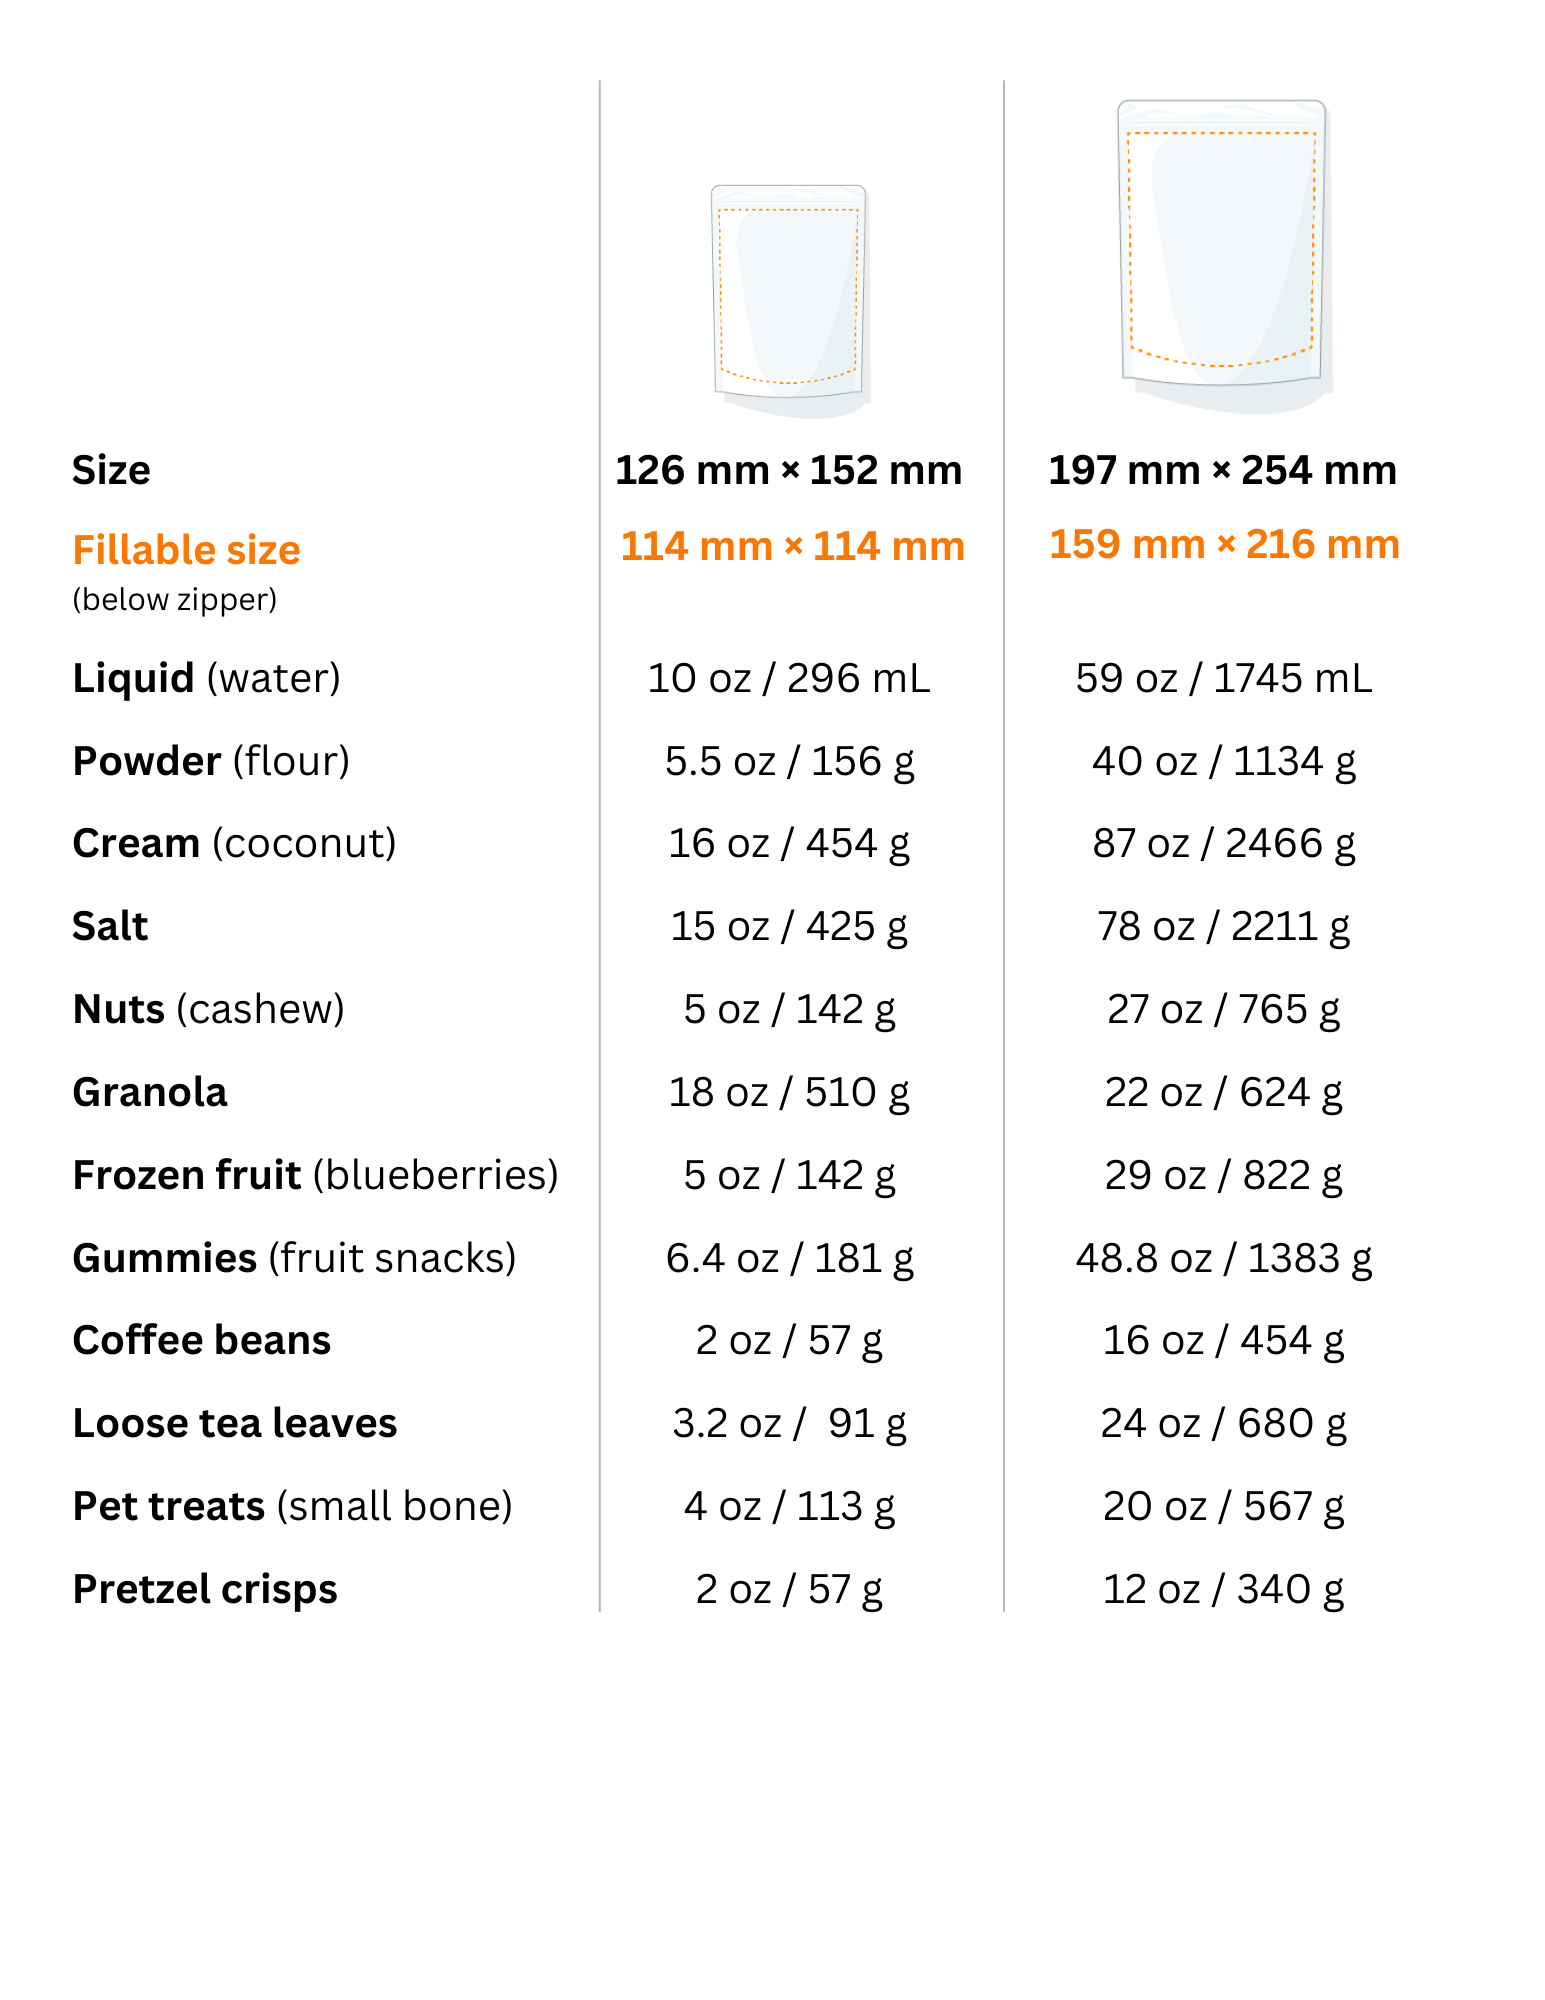 chart showing how much of various products stand up pouches can hold